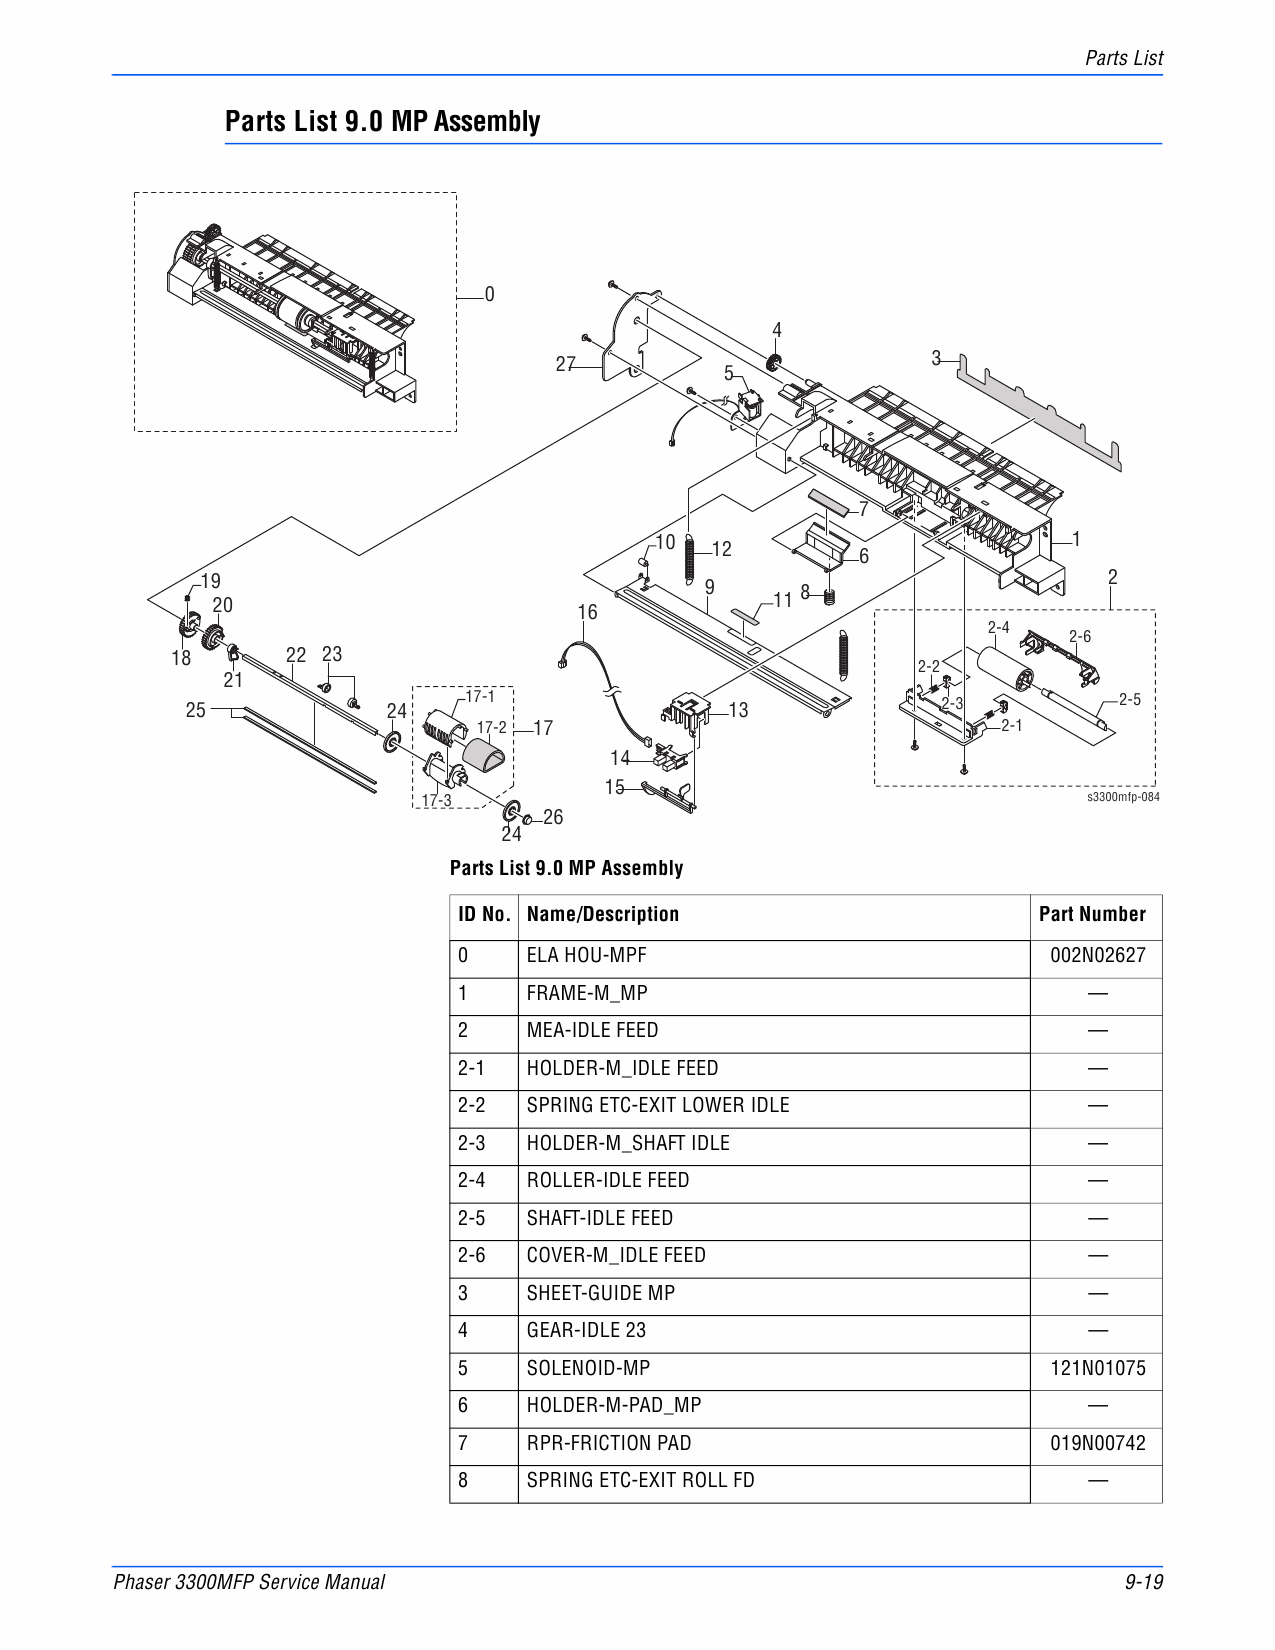 Xerox Phaser 3300-MFP Parts List and Service Manual-5